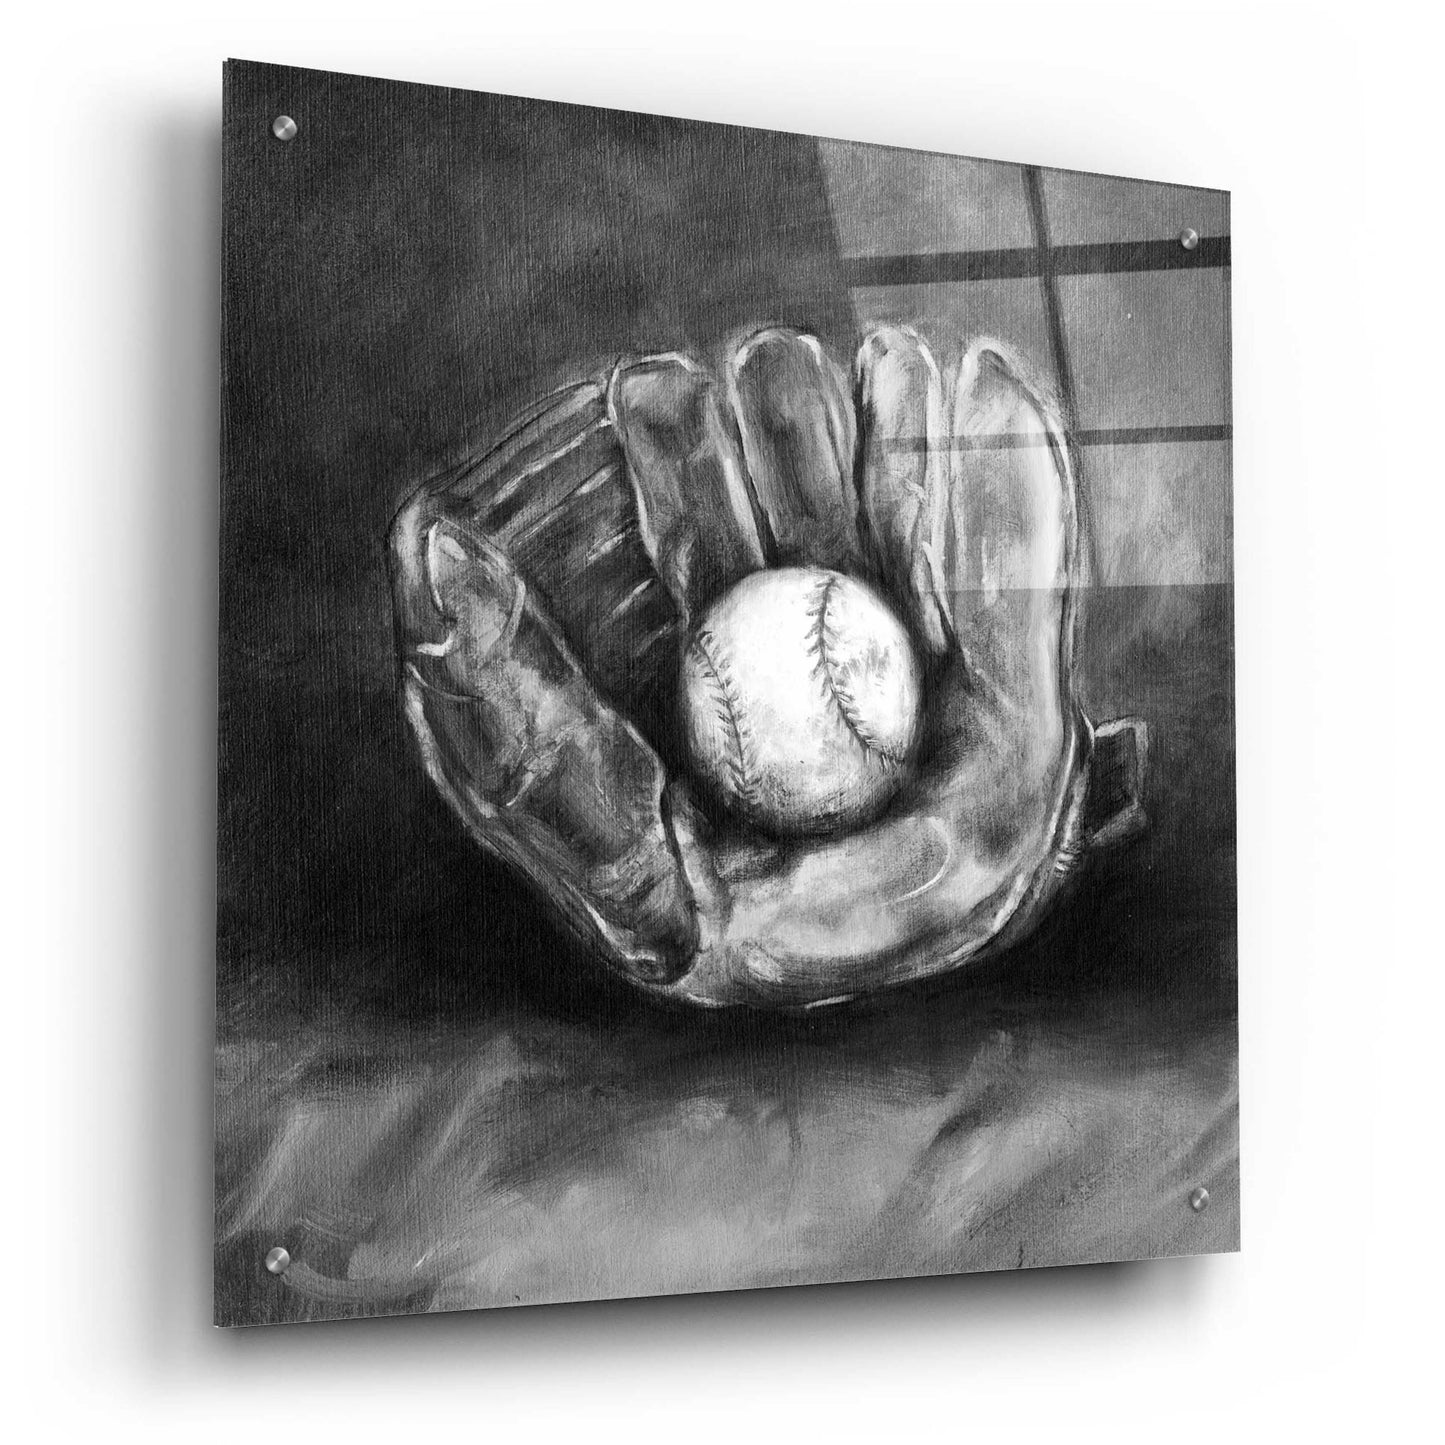 Epic Art 'Rustic Sports III Black and White' by Ethan Harper, Acrylic Glass Wall Art,24x24